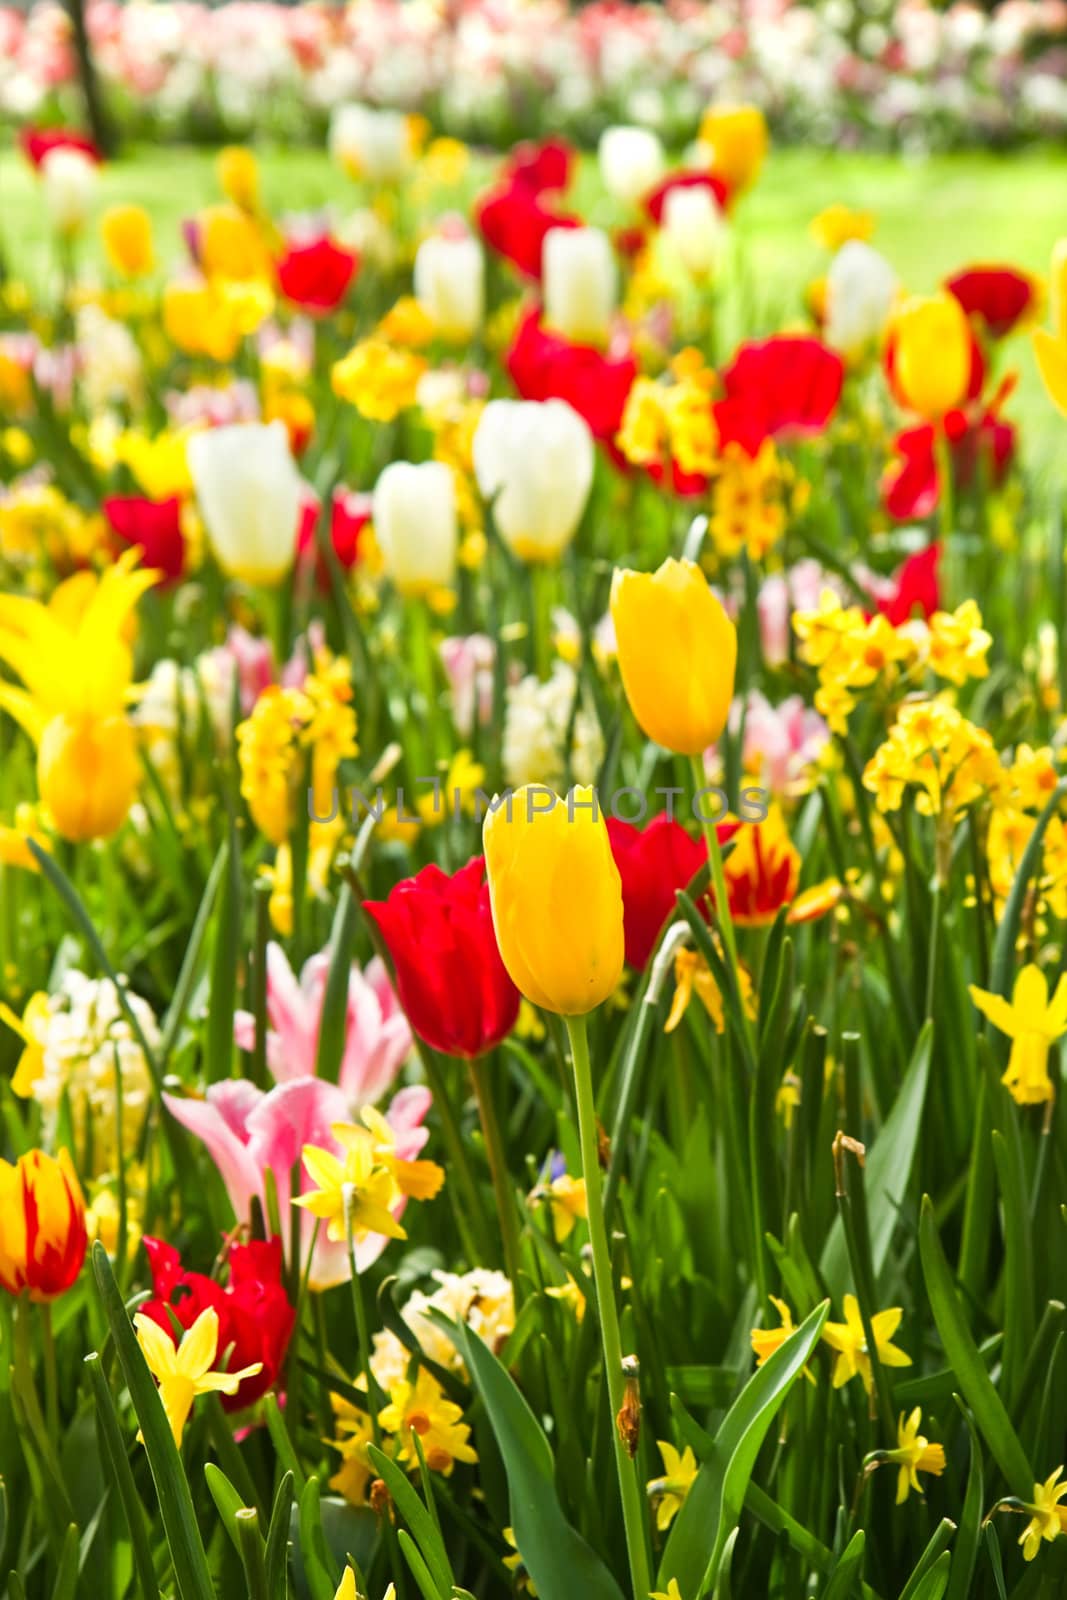 Tulips and daffodils in lots of colors in spring by Colette